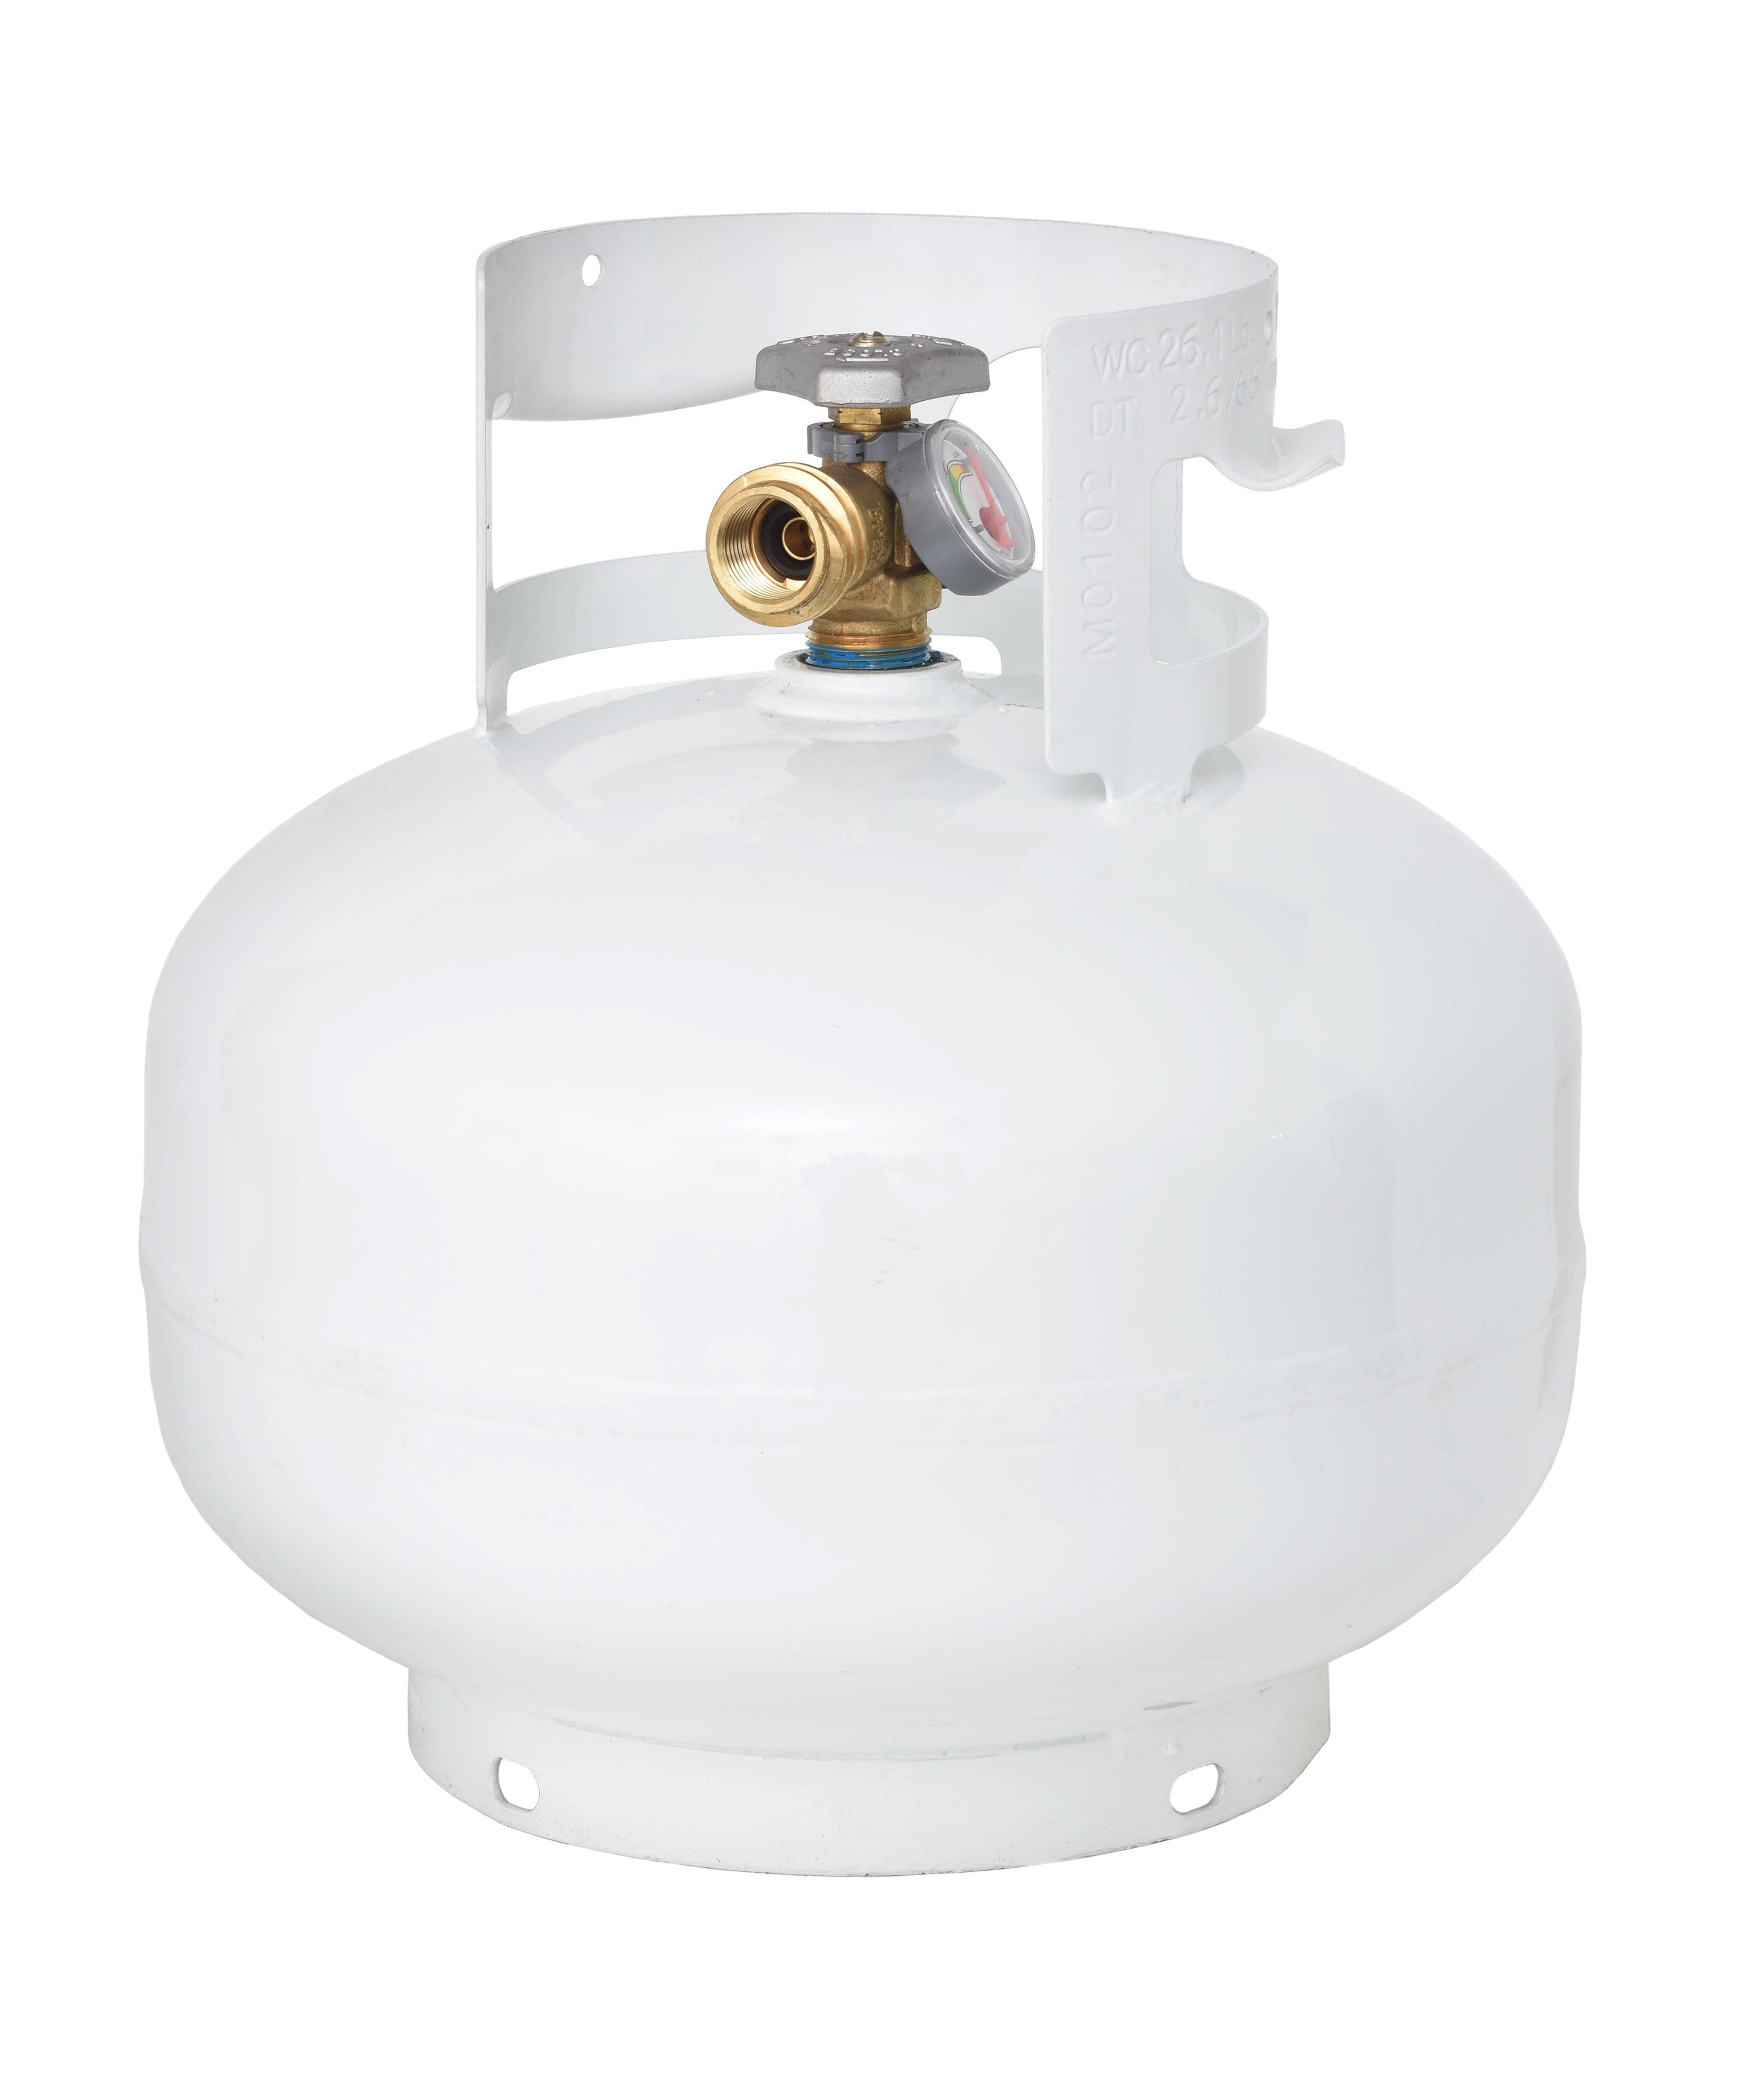 Flame King 11 Pound Propane Tank Cylinder Squatty with Type 1 OPD Valve - Flame King